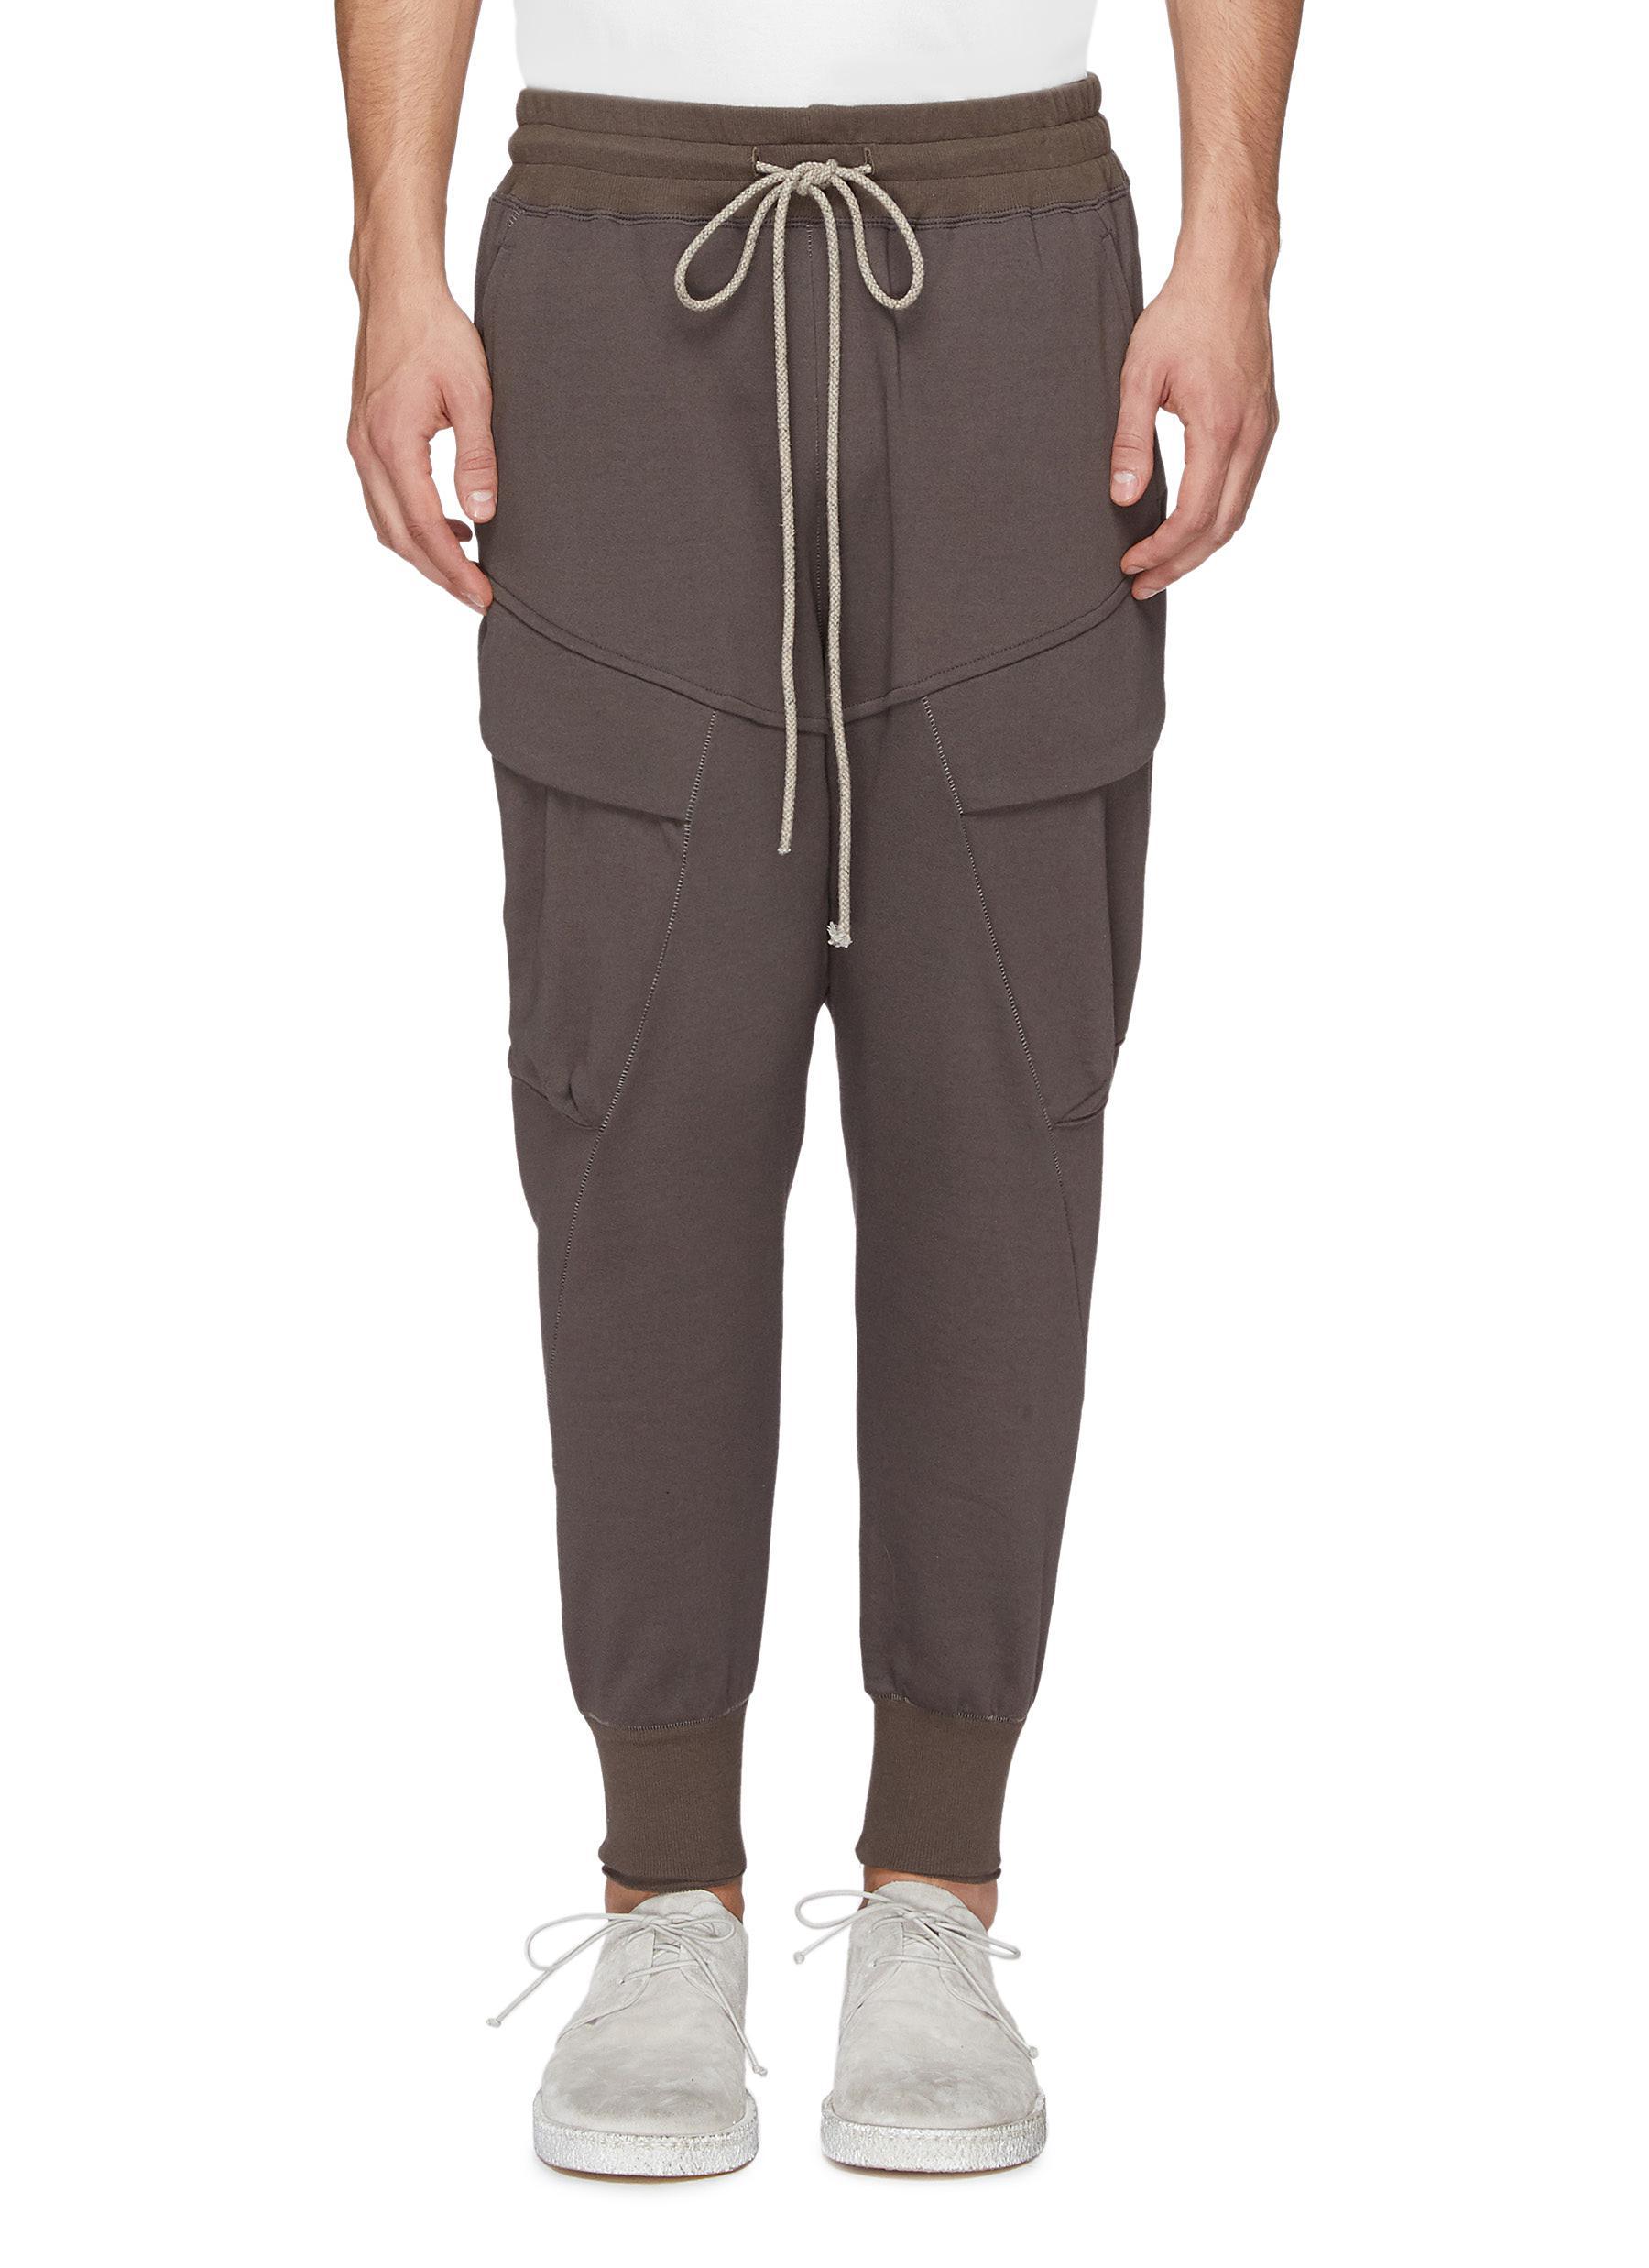 The Viridi-anne Cargo jogging Pants in Brown for Men - Lyst